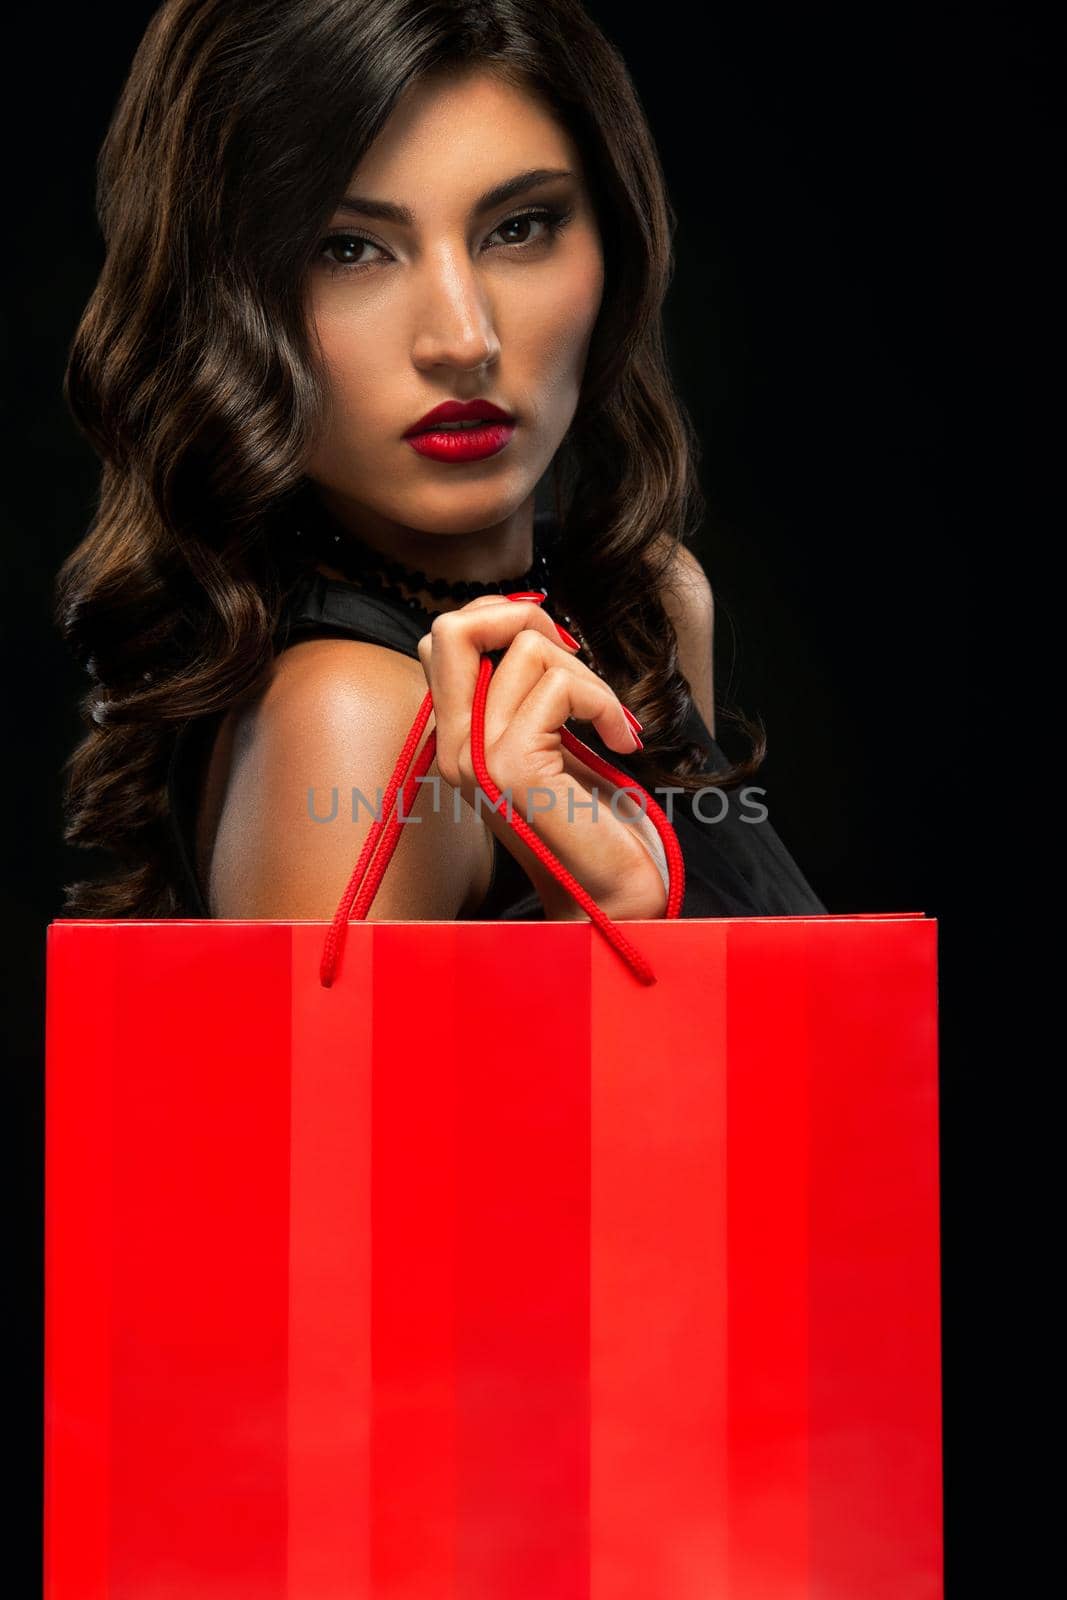 Beautiful young woman make shopping in black friday holiday. Girl with black bag on dark background.